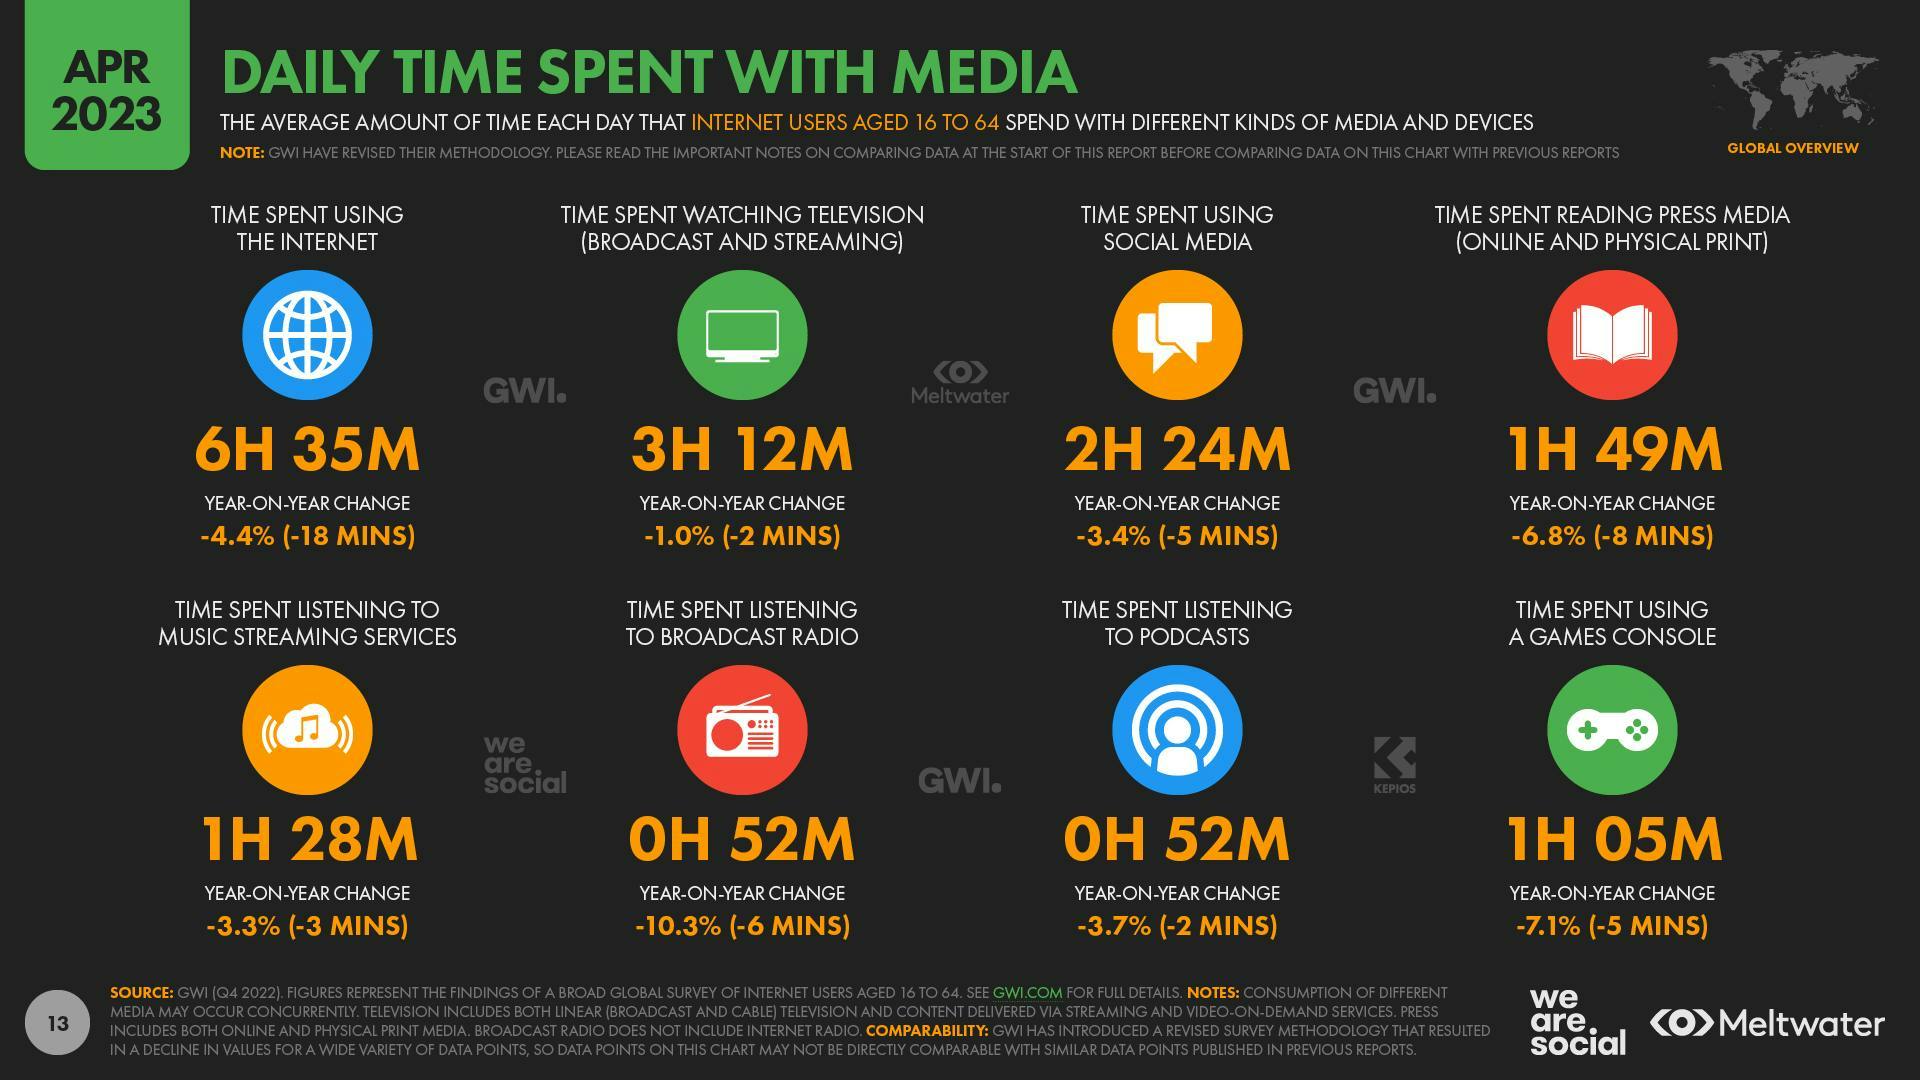 April 2023 Global State of Digital Report: Daily Time Spent with Media